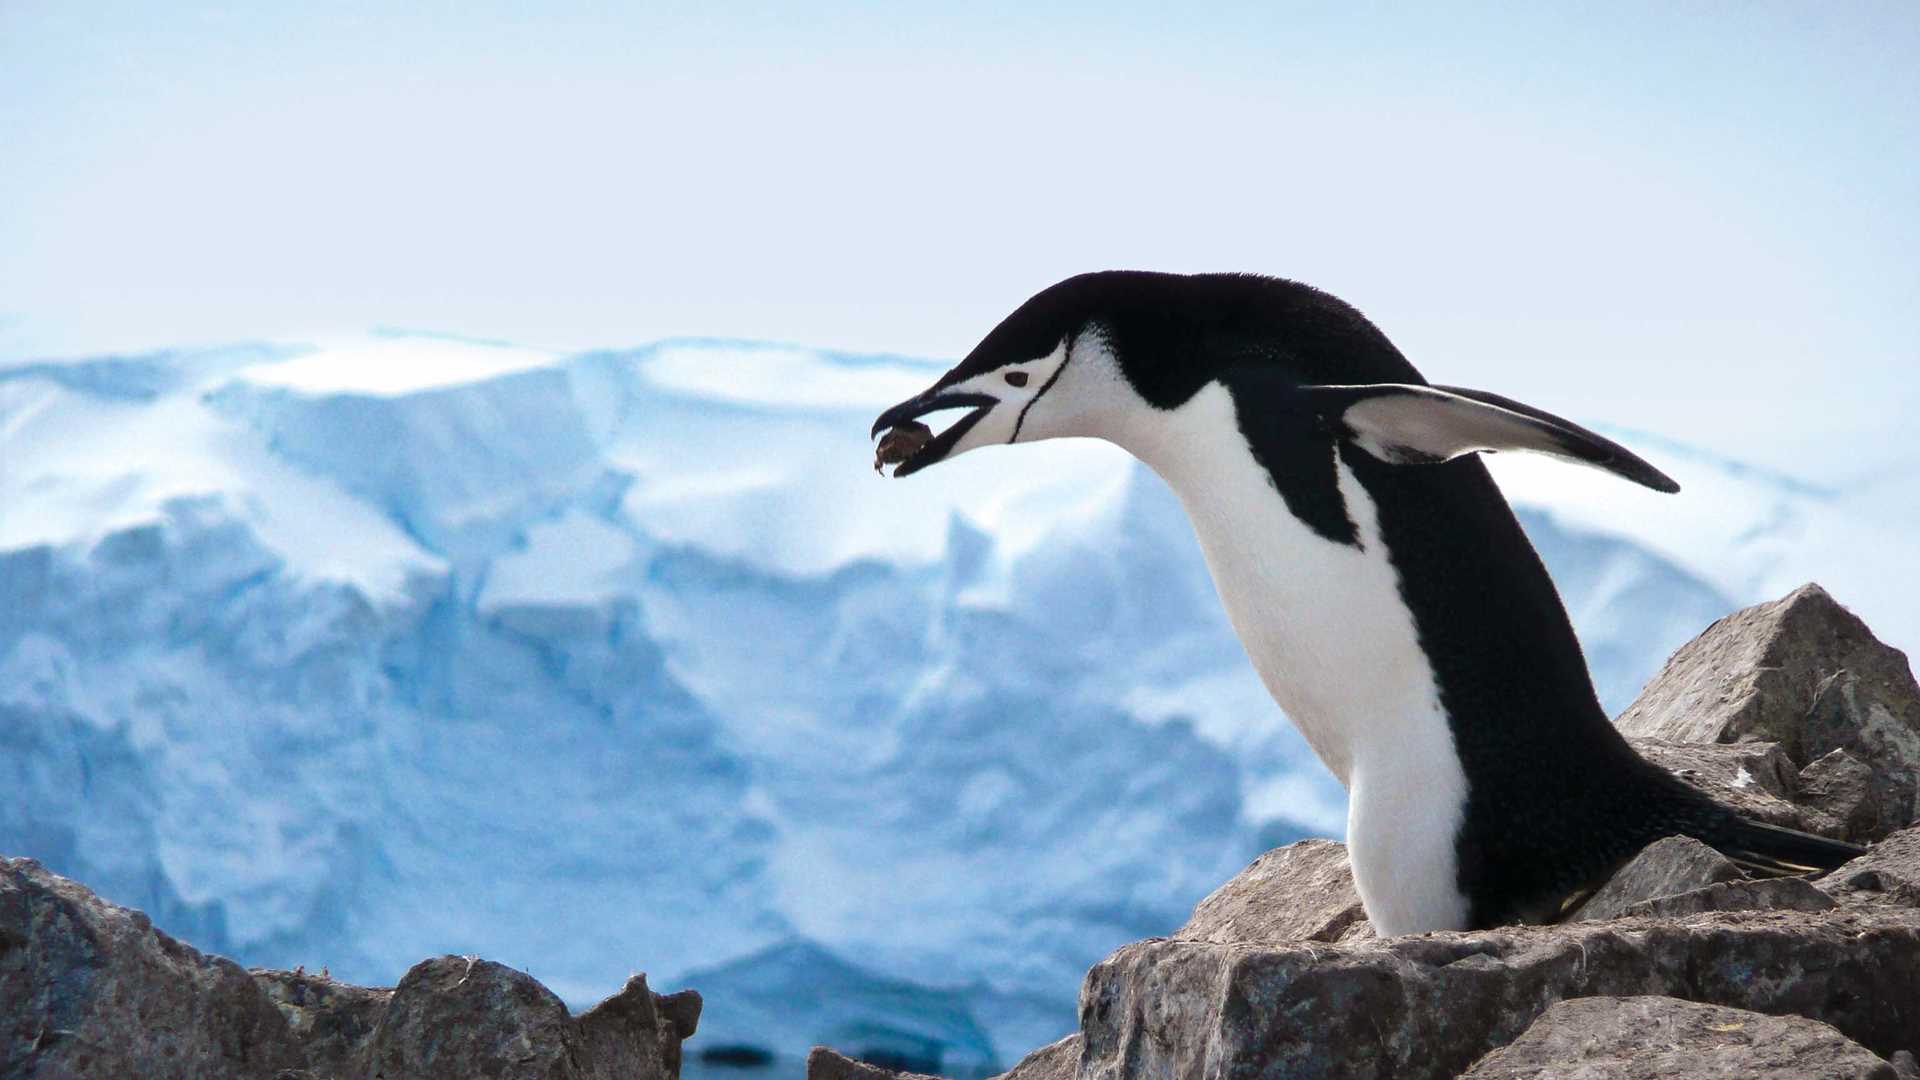 A chinstrap penguin carries a pebble in its beak